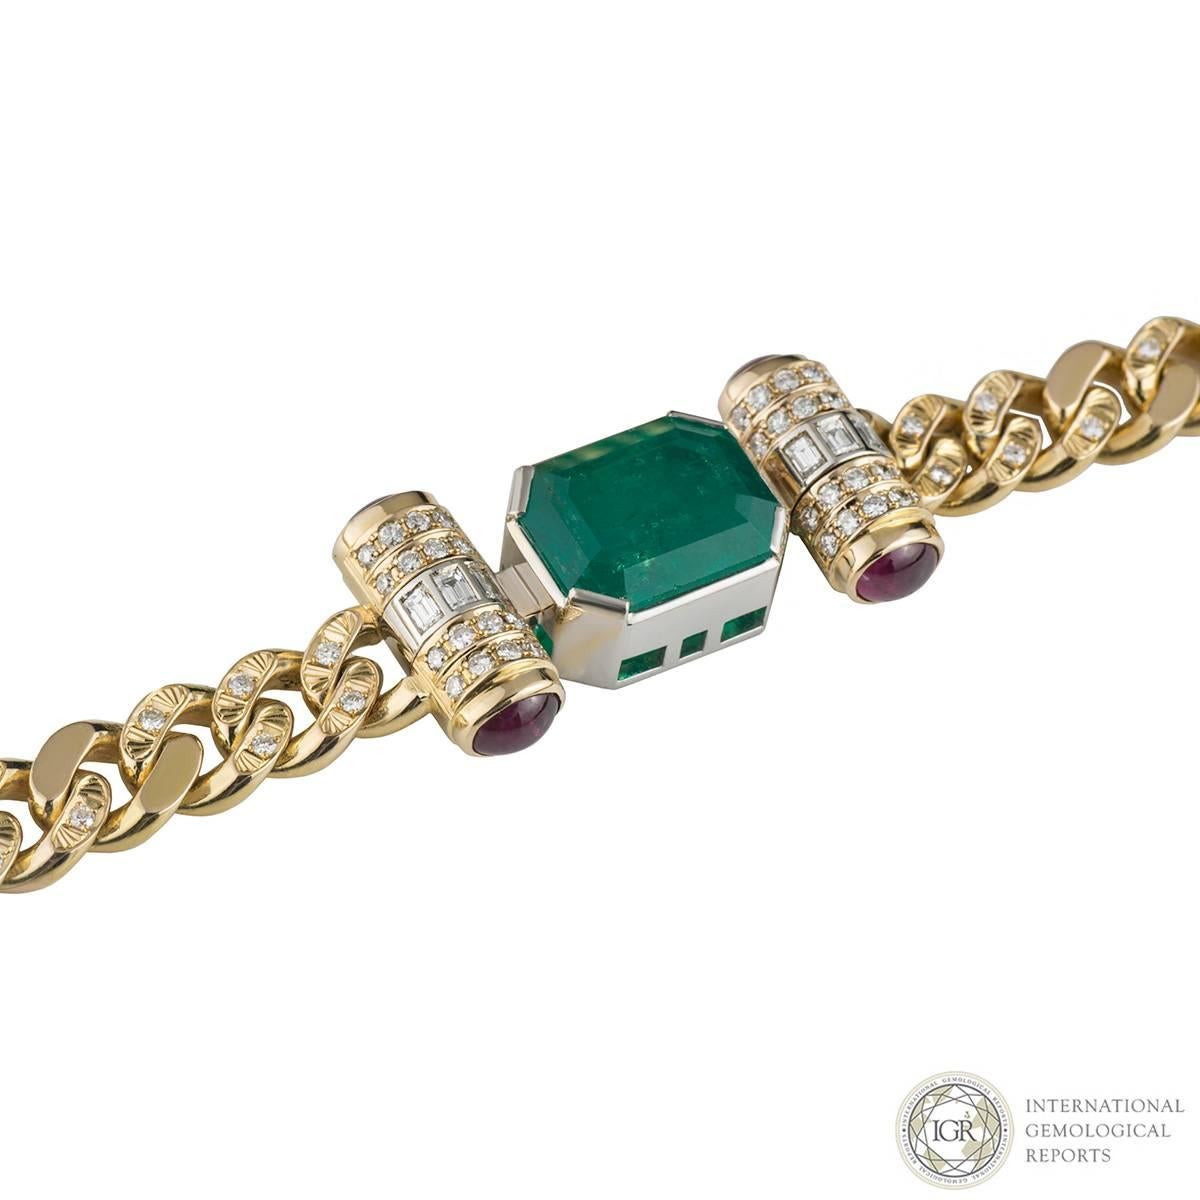 A lovely 18k yellow gold diamond, emerald and ruby necklace. The necklace comprises of an octagonal cut emerald gemstone with a total weight of 9.67ct, with a strong green colour and Type III SI clarity, in a rubover setting. Complementing the